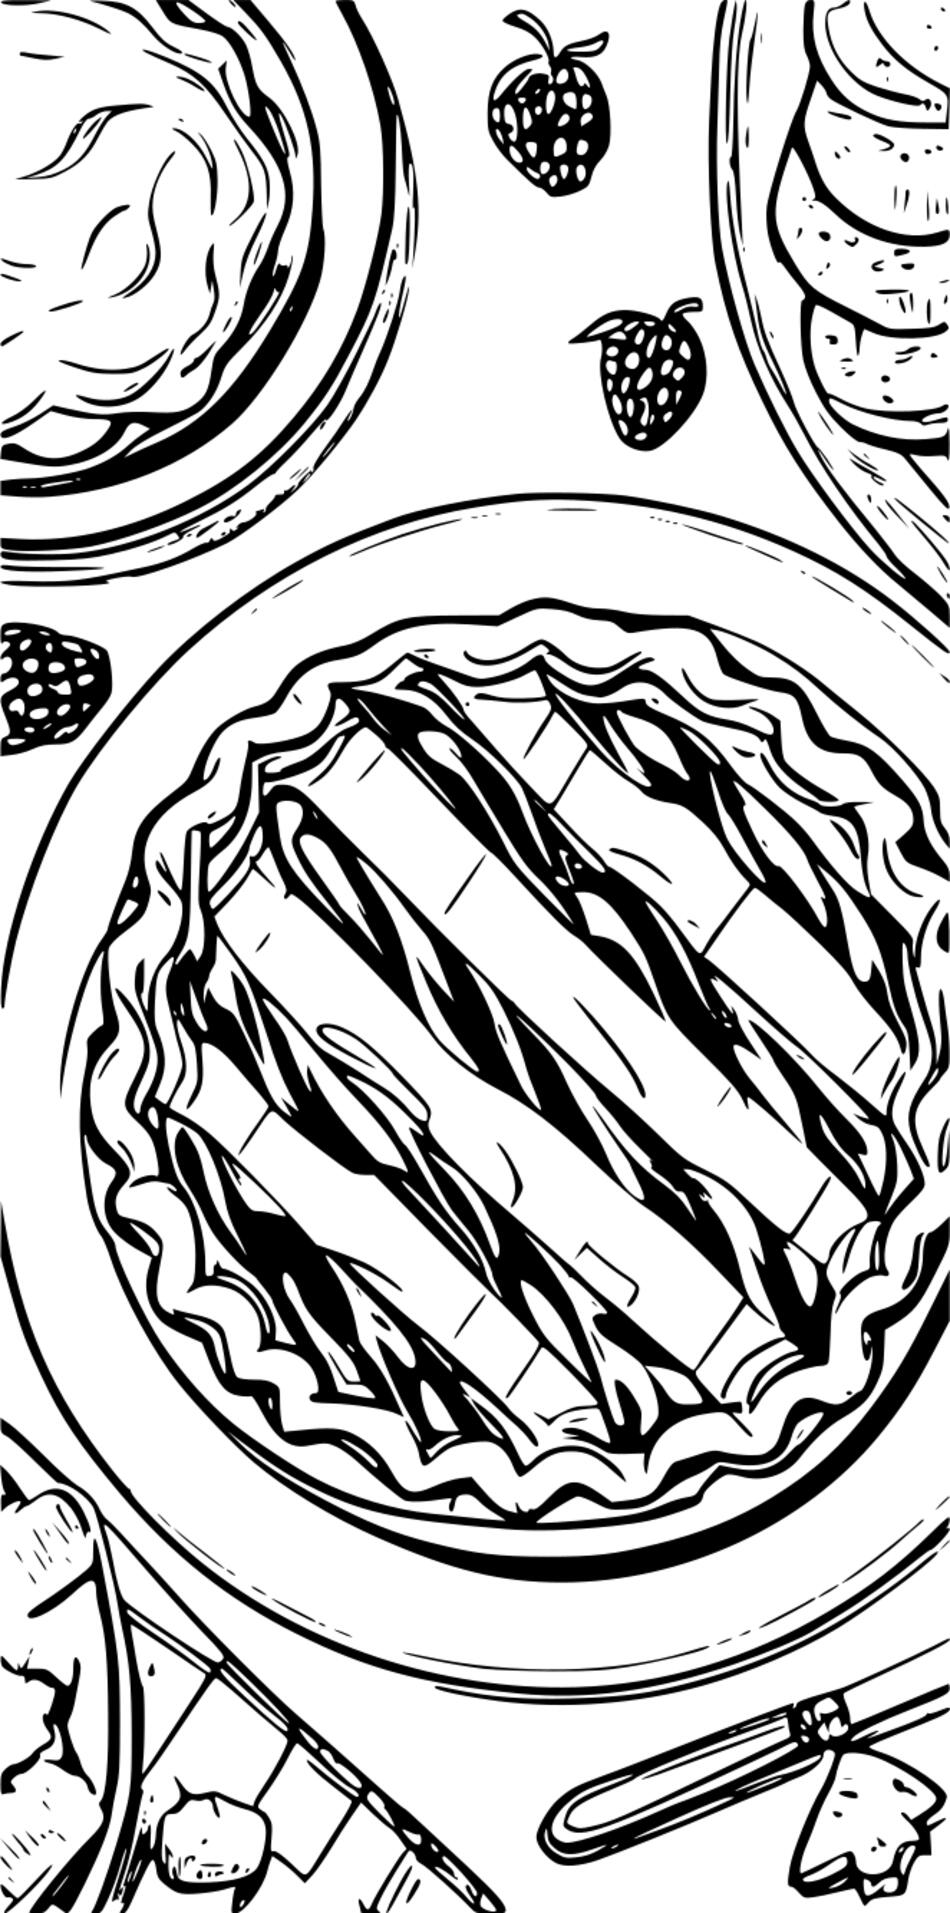 Coloring book Homemade pies (Vertical)